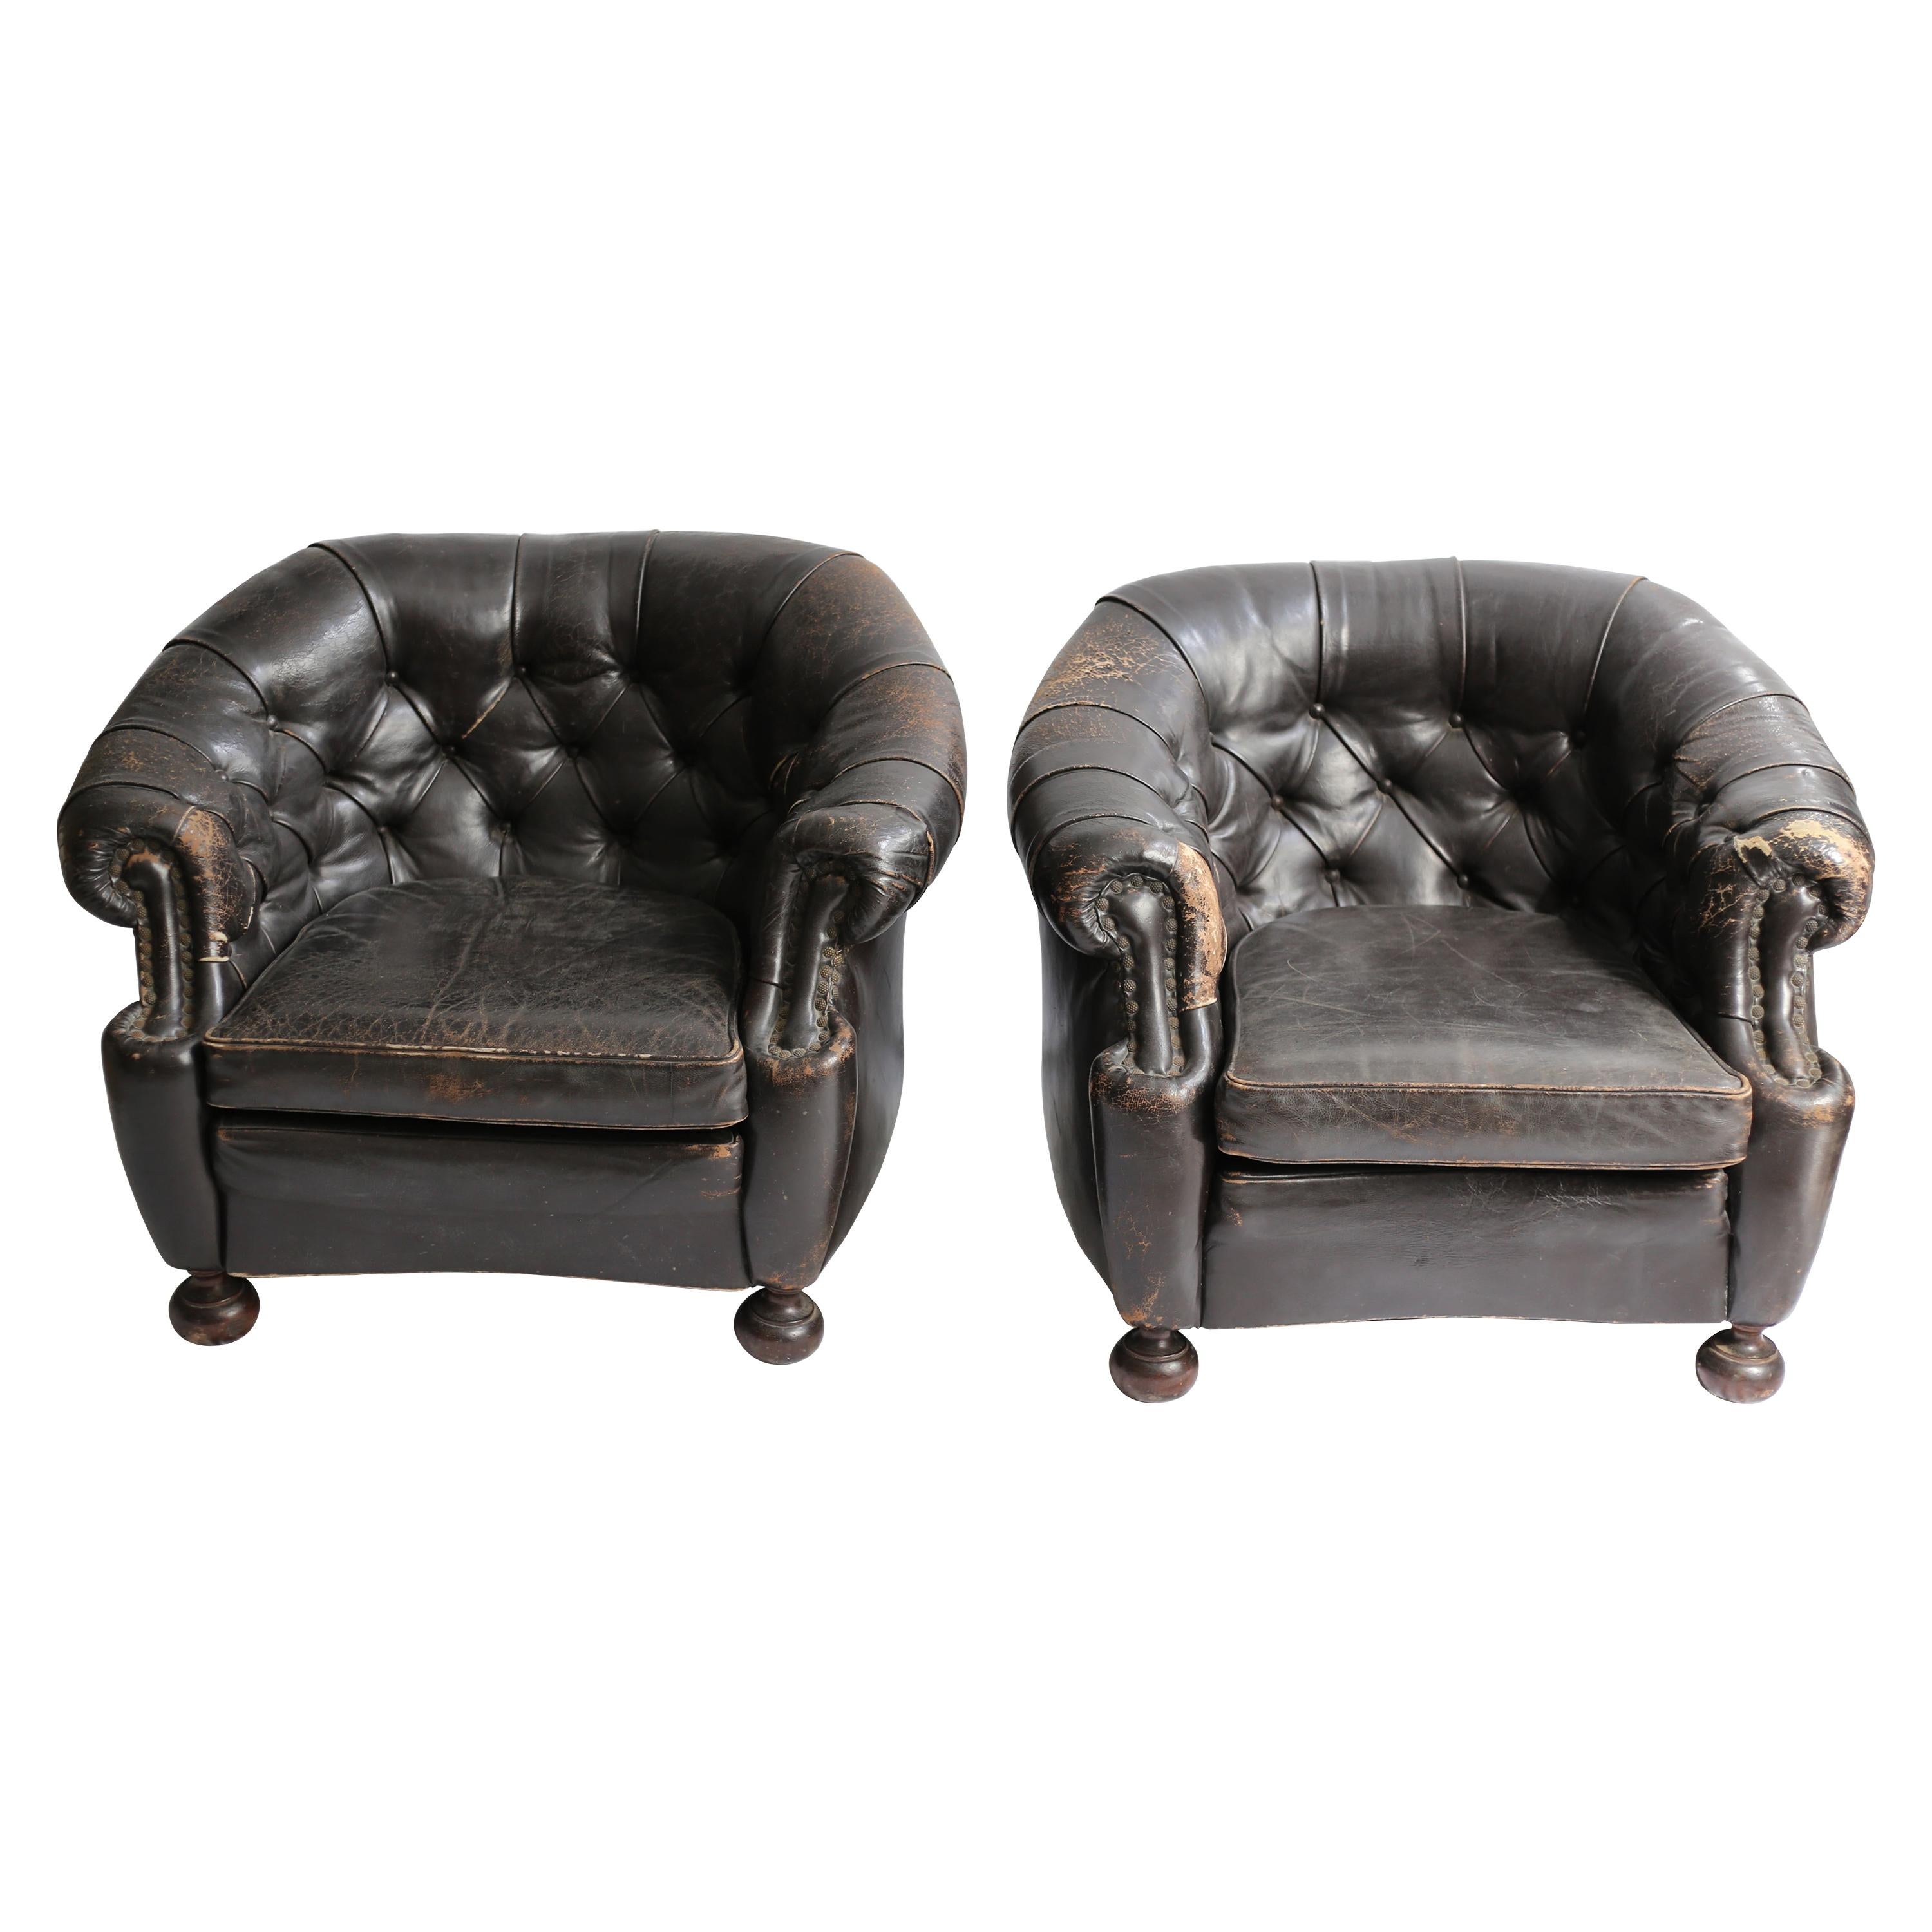 Vintage Pair of Leather Chesterfield Club Chairs For Sale